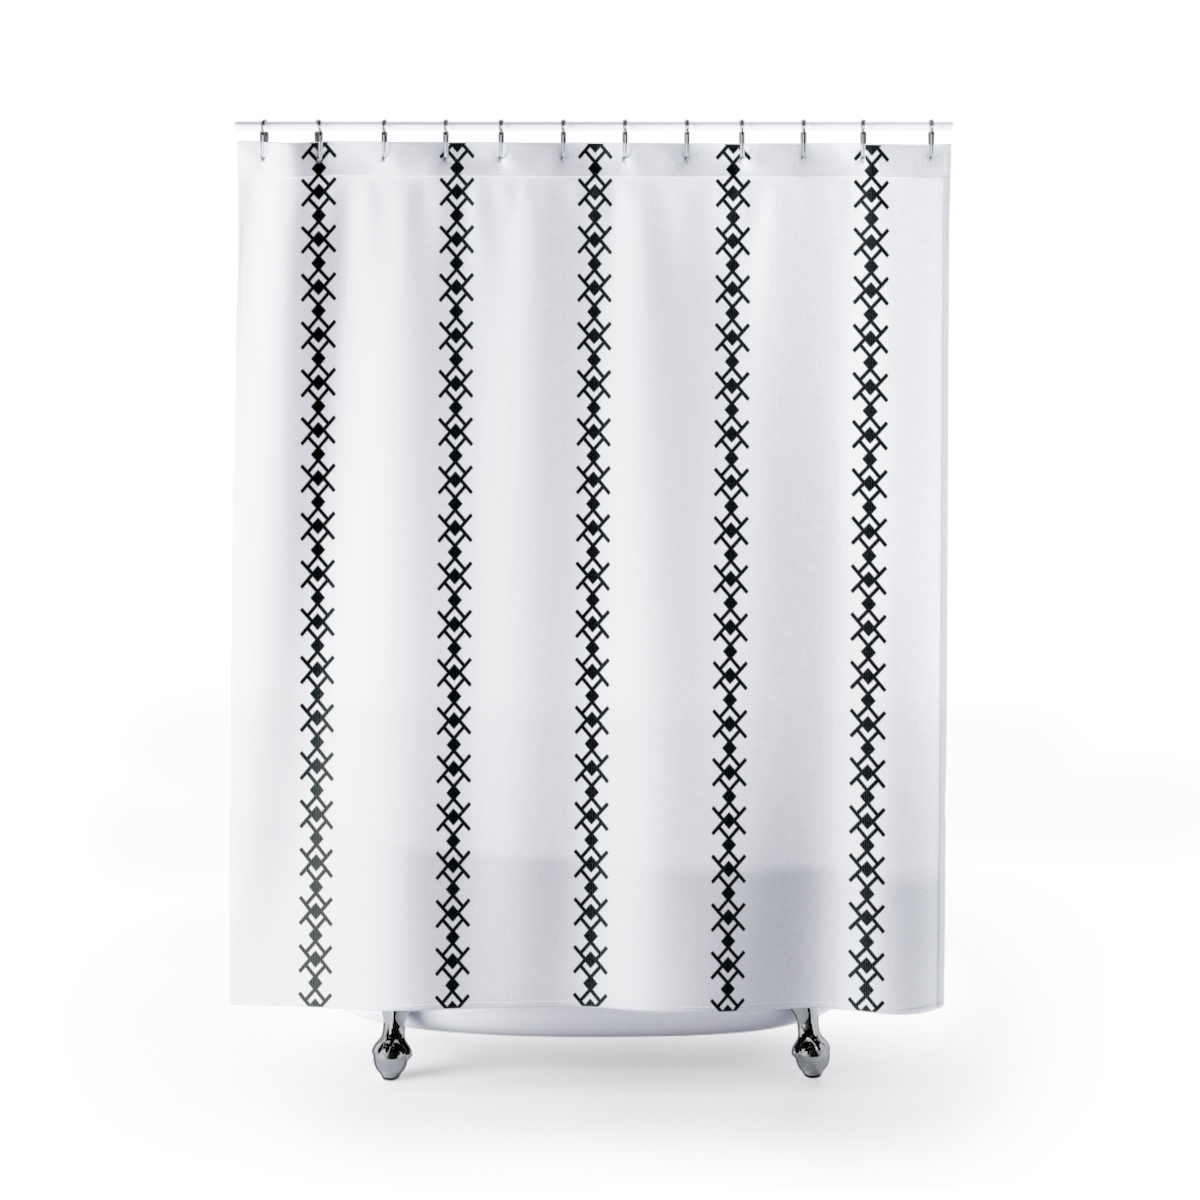 Black & White Shower Curtain with Vertical Geometric Stripes